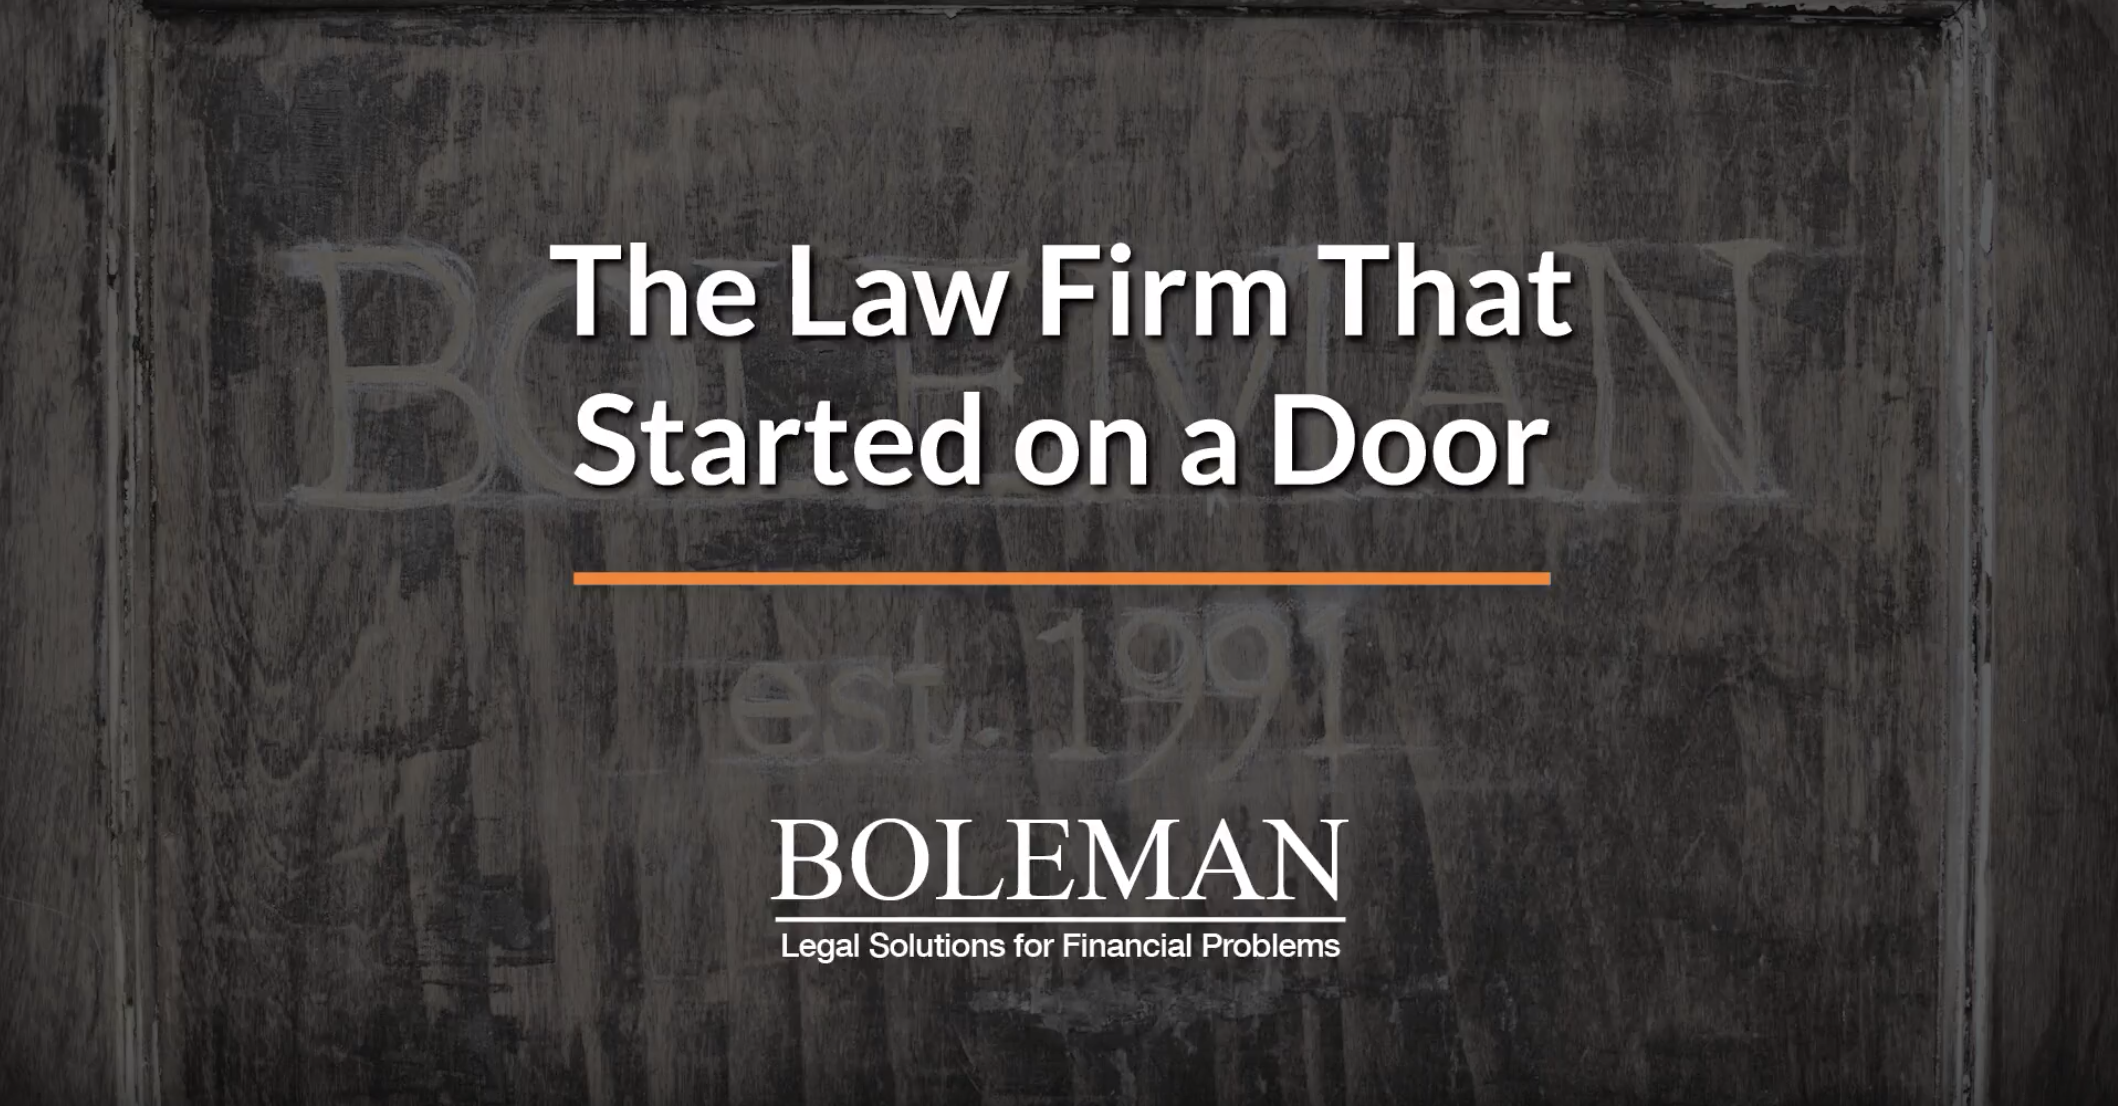 The Law Firm That Started on a Door